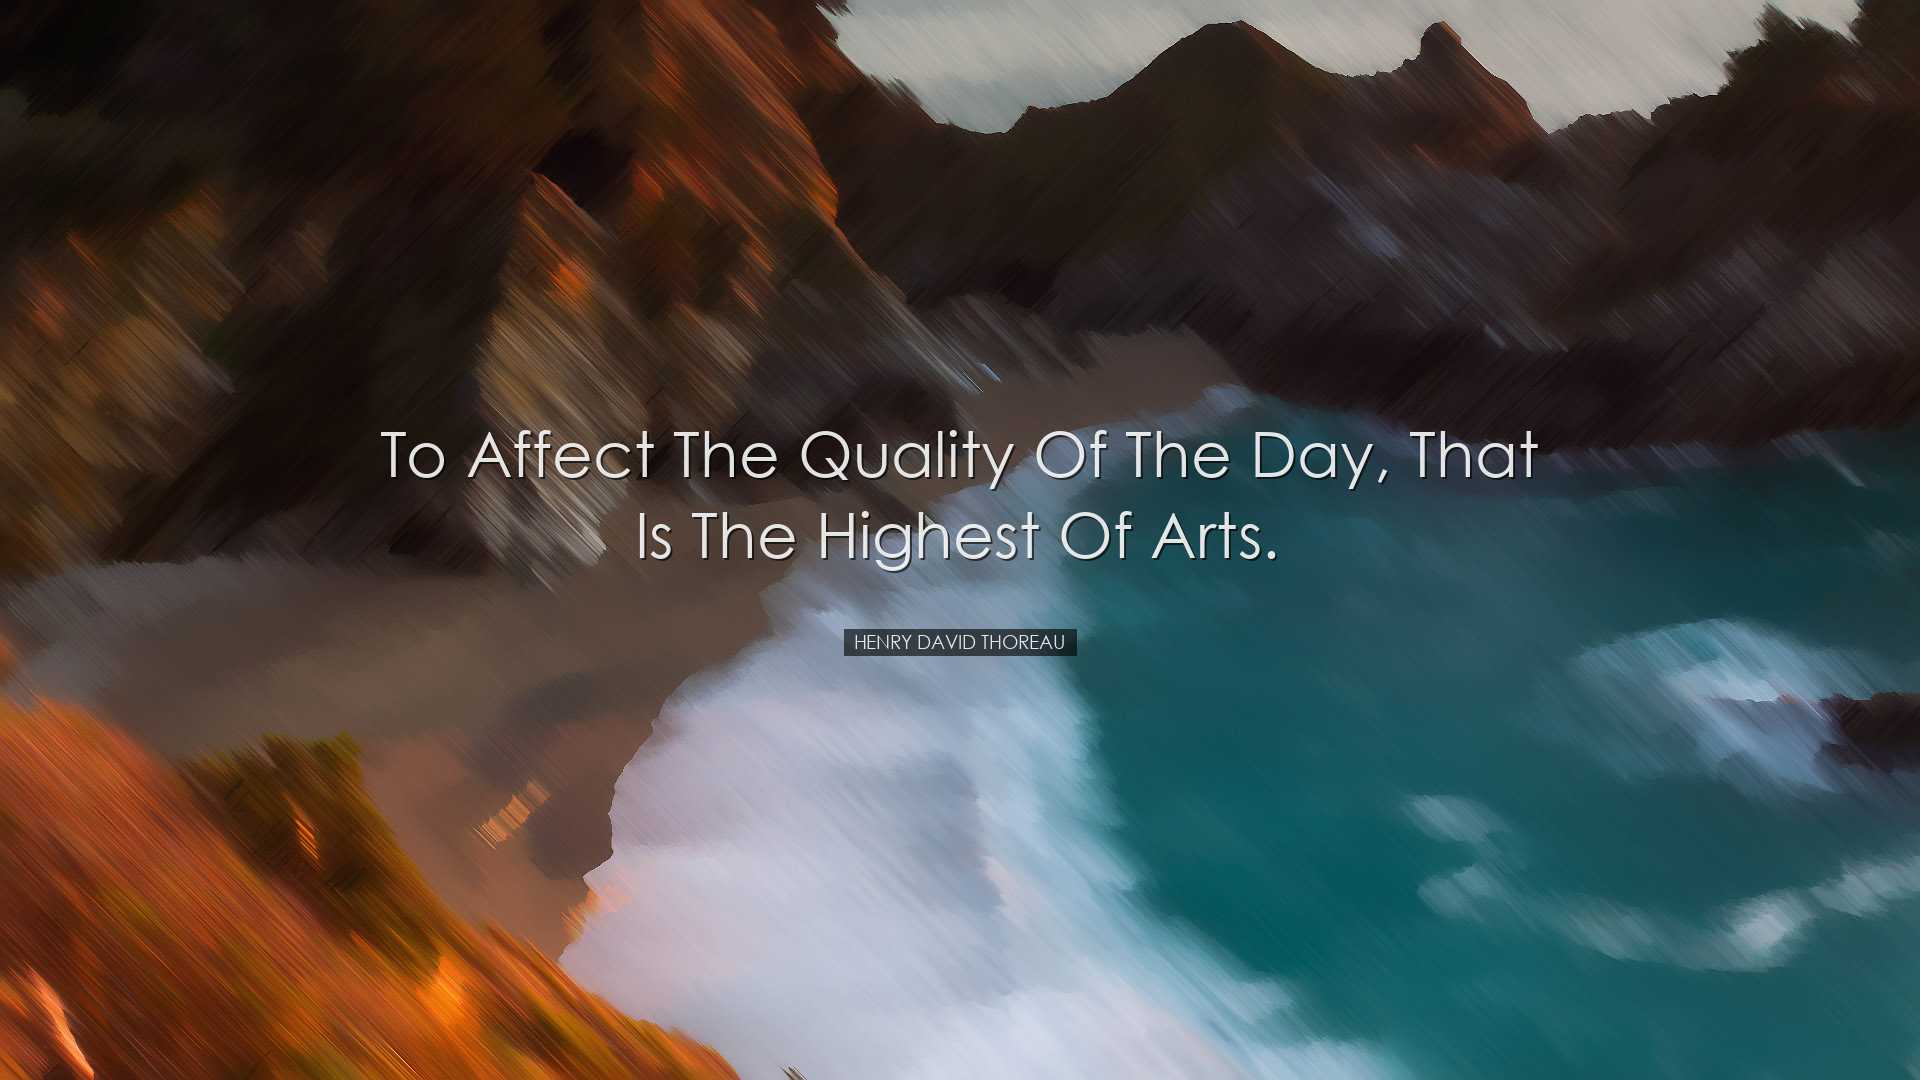 To affect the quality of the day, that is the highest of arts. - H